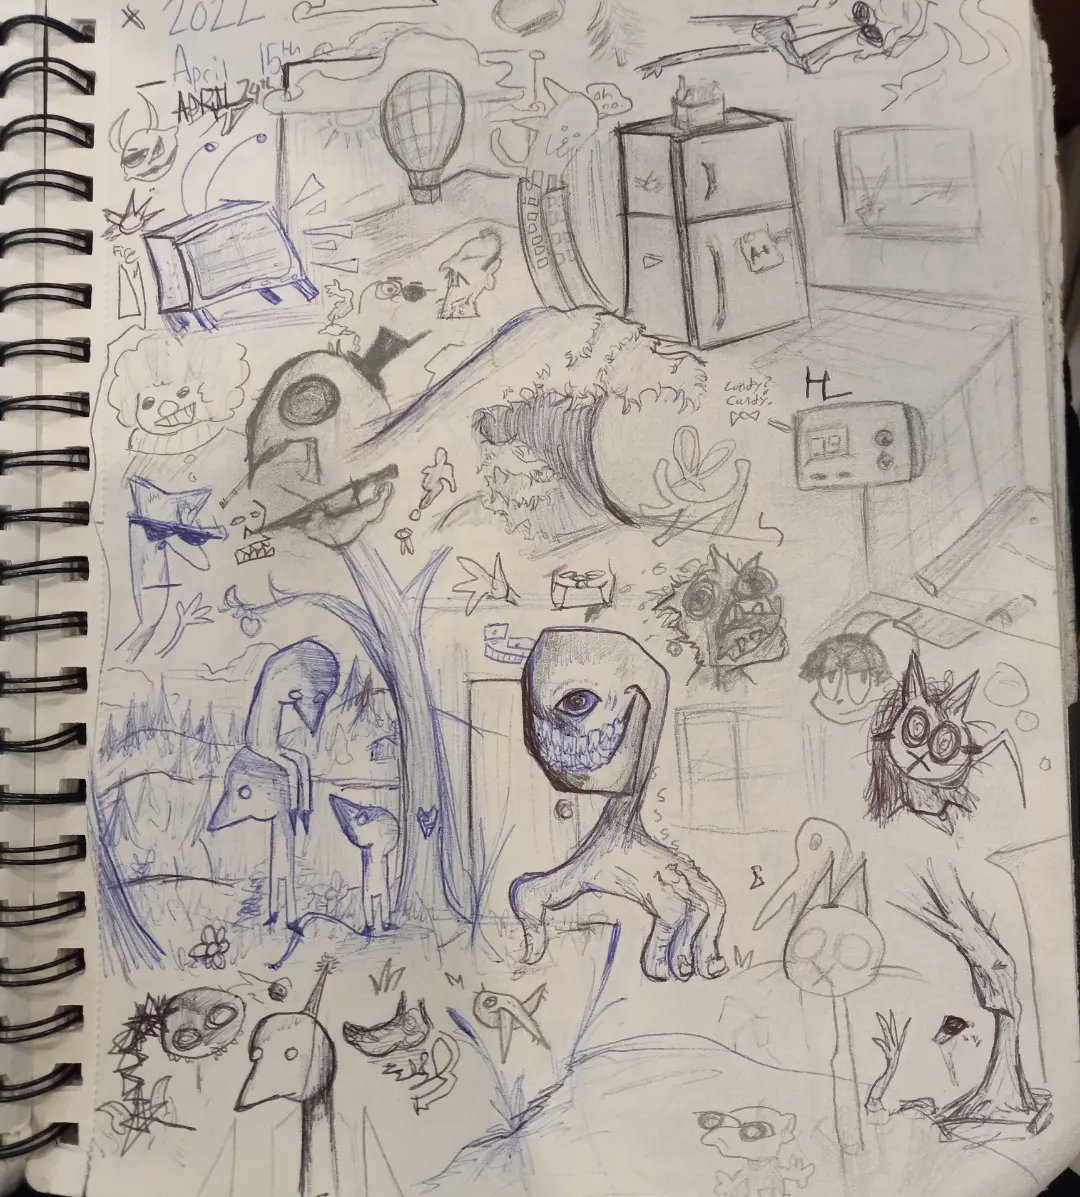 random doodle pages from the past few month... the amount of fandoms drawn is good for the algorithm 

#art #watamote #sketchbook #sketches #artontwitter #theymightbegiants #VOCALOID #hatsunemiku #teto #triplebaka #HorrorArt #originalcharacter #commissionsopen #commissions